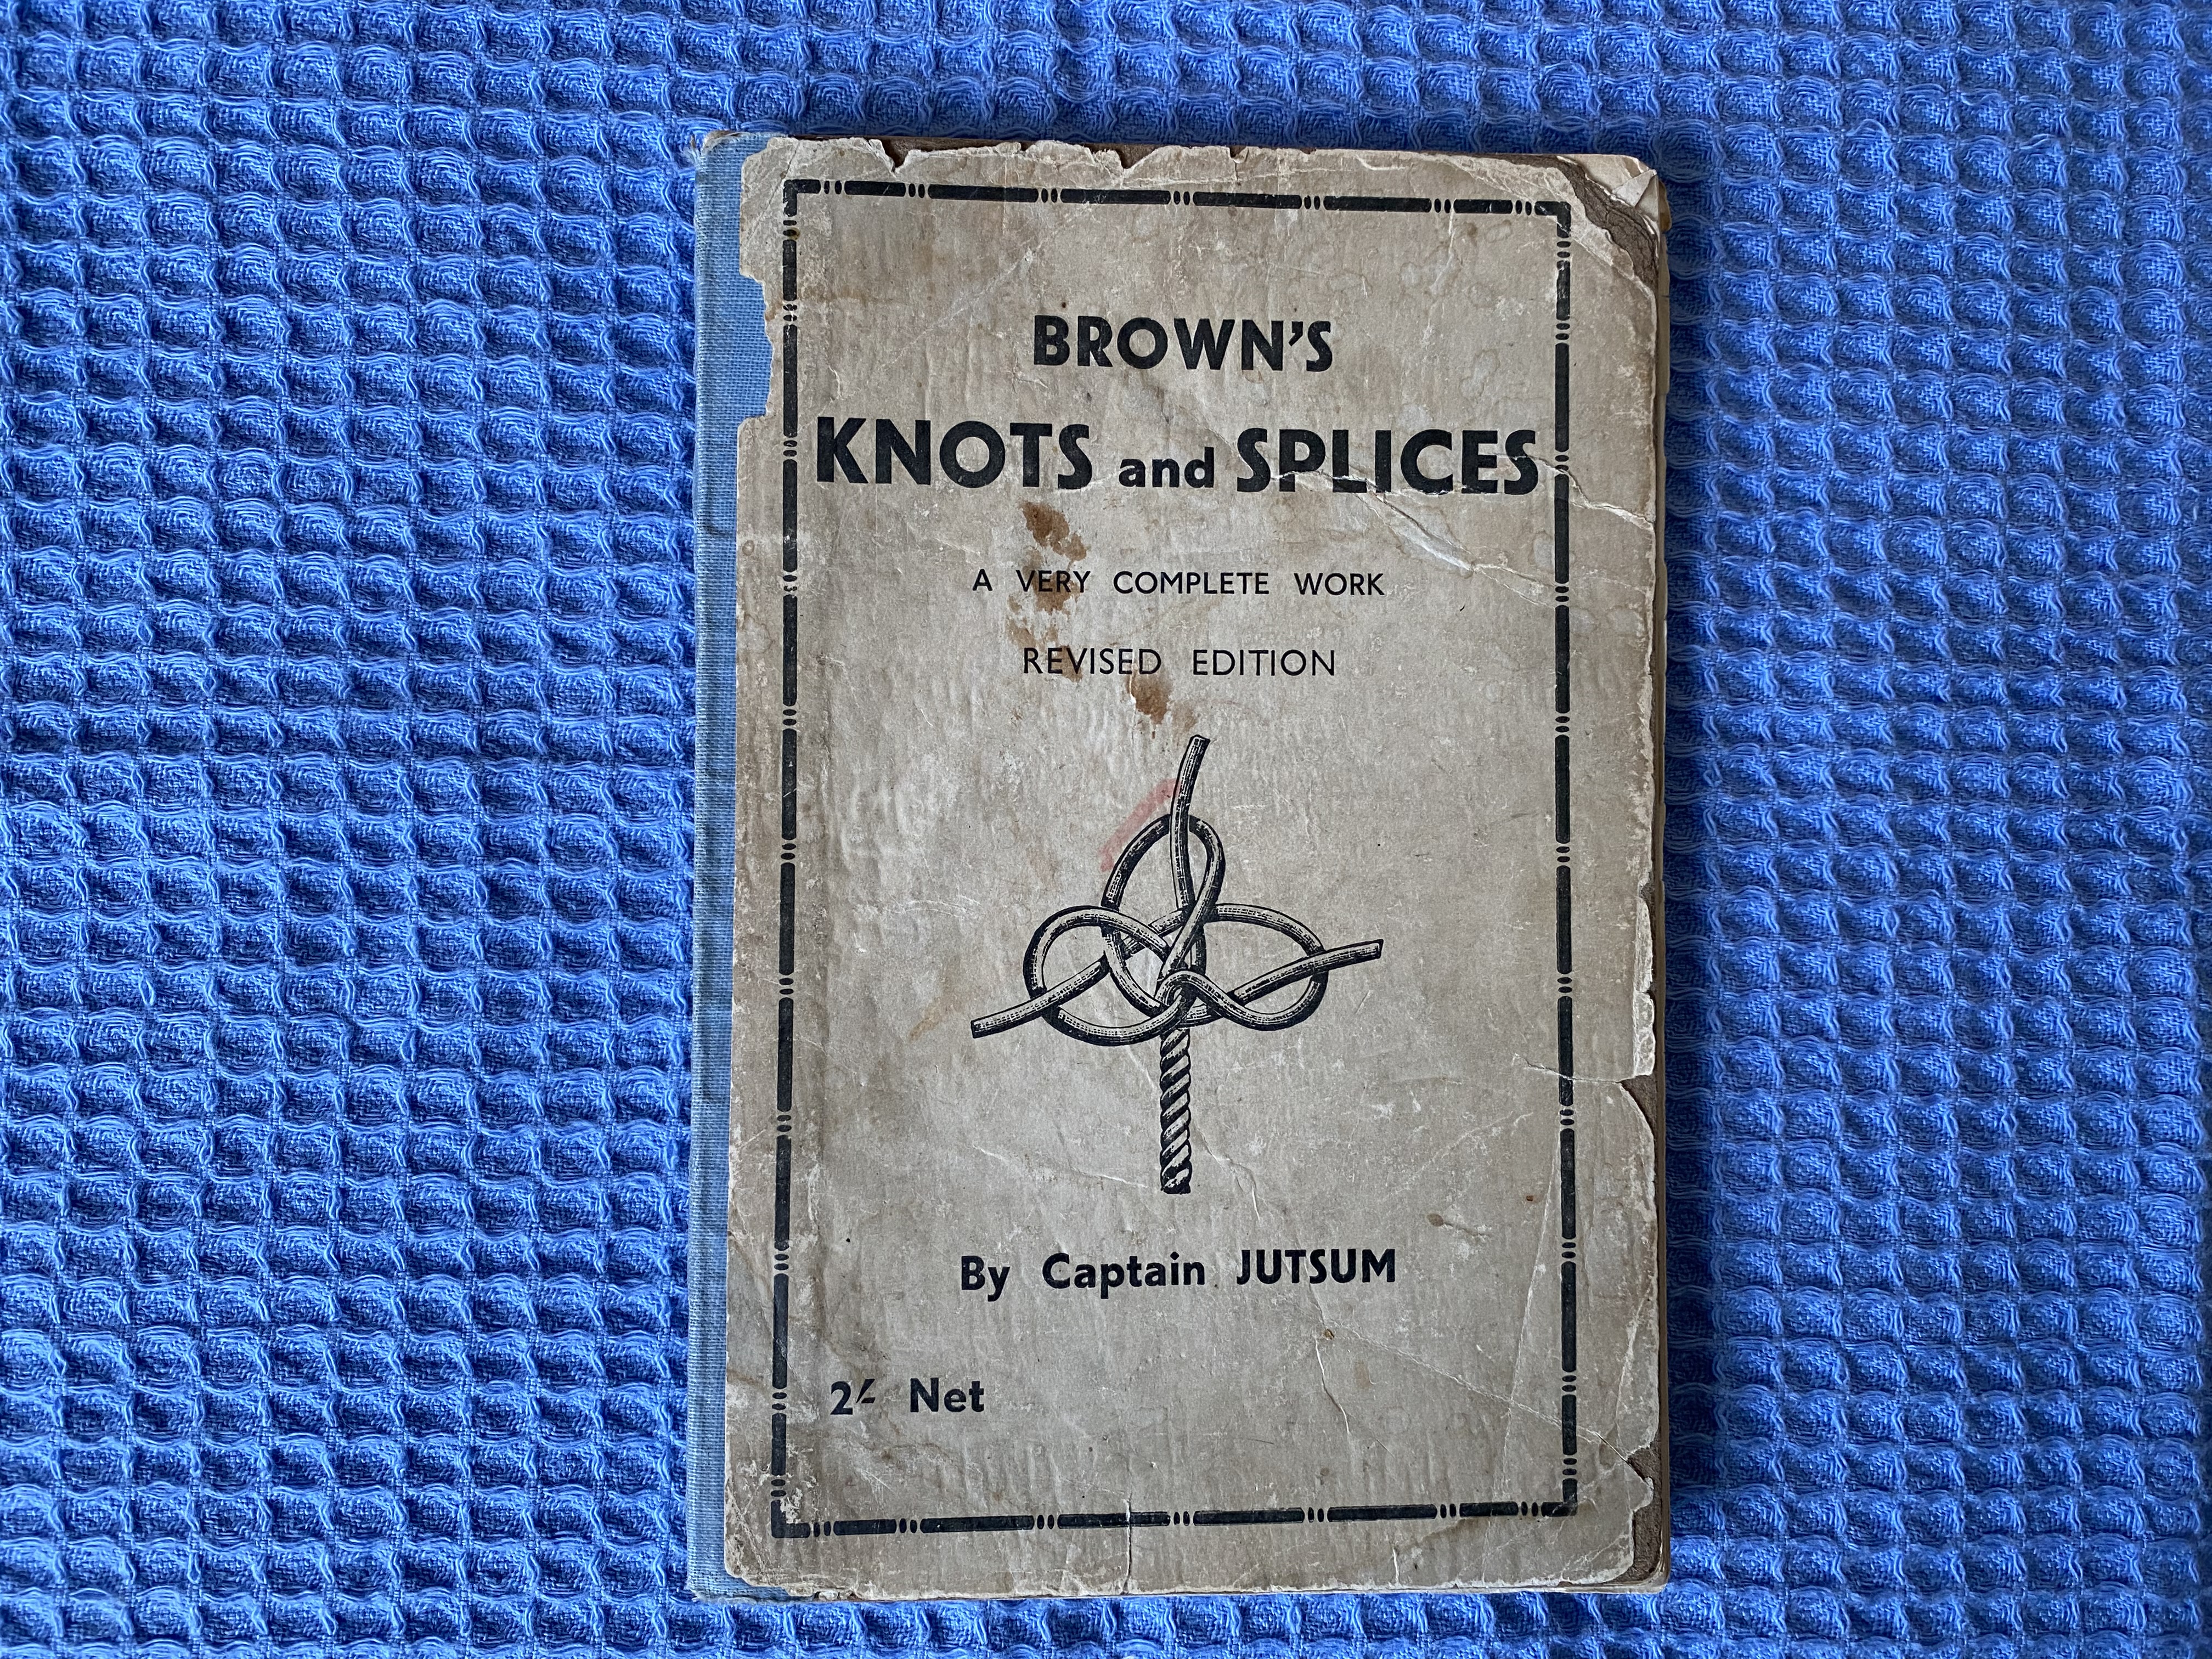 VERY OLD BOOK ENTITLED BROWNS KNOTS AND SPLICES BY CAPTAIN JUTSUM